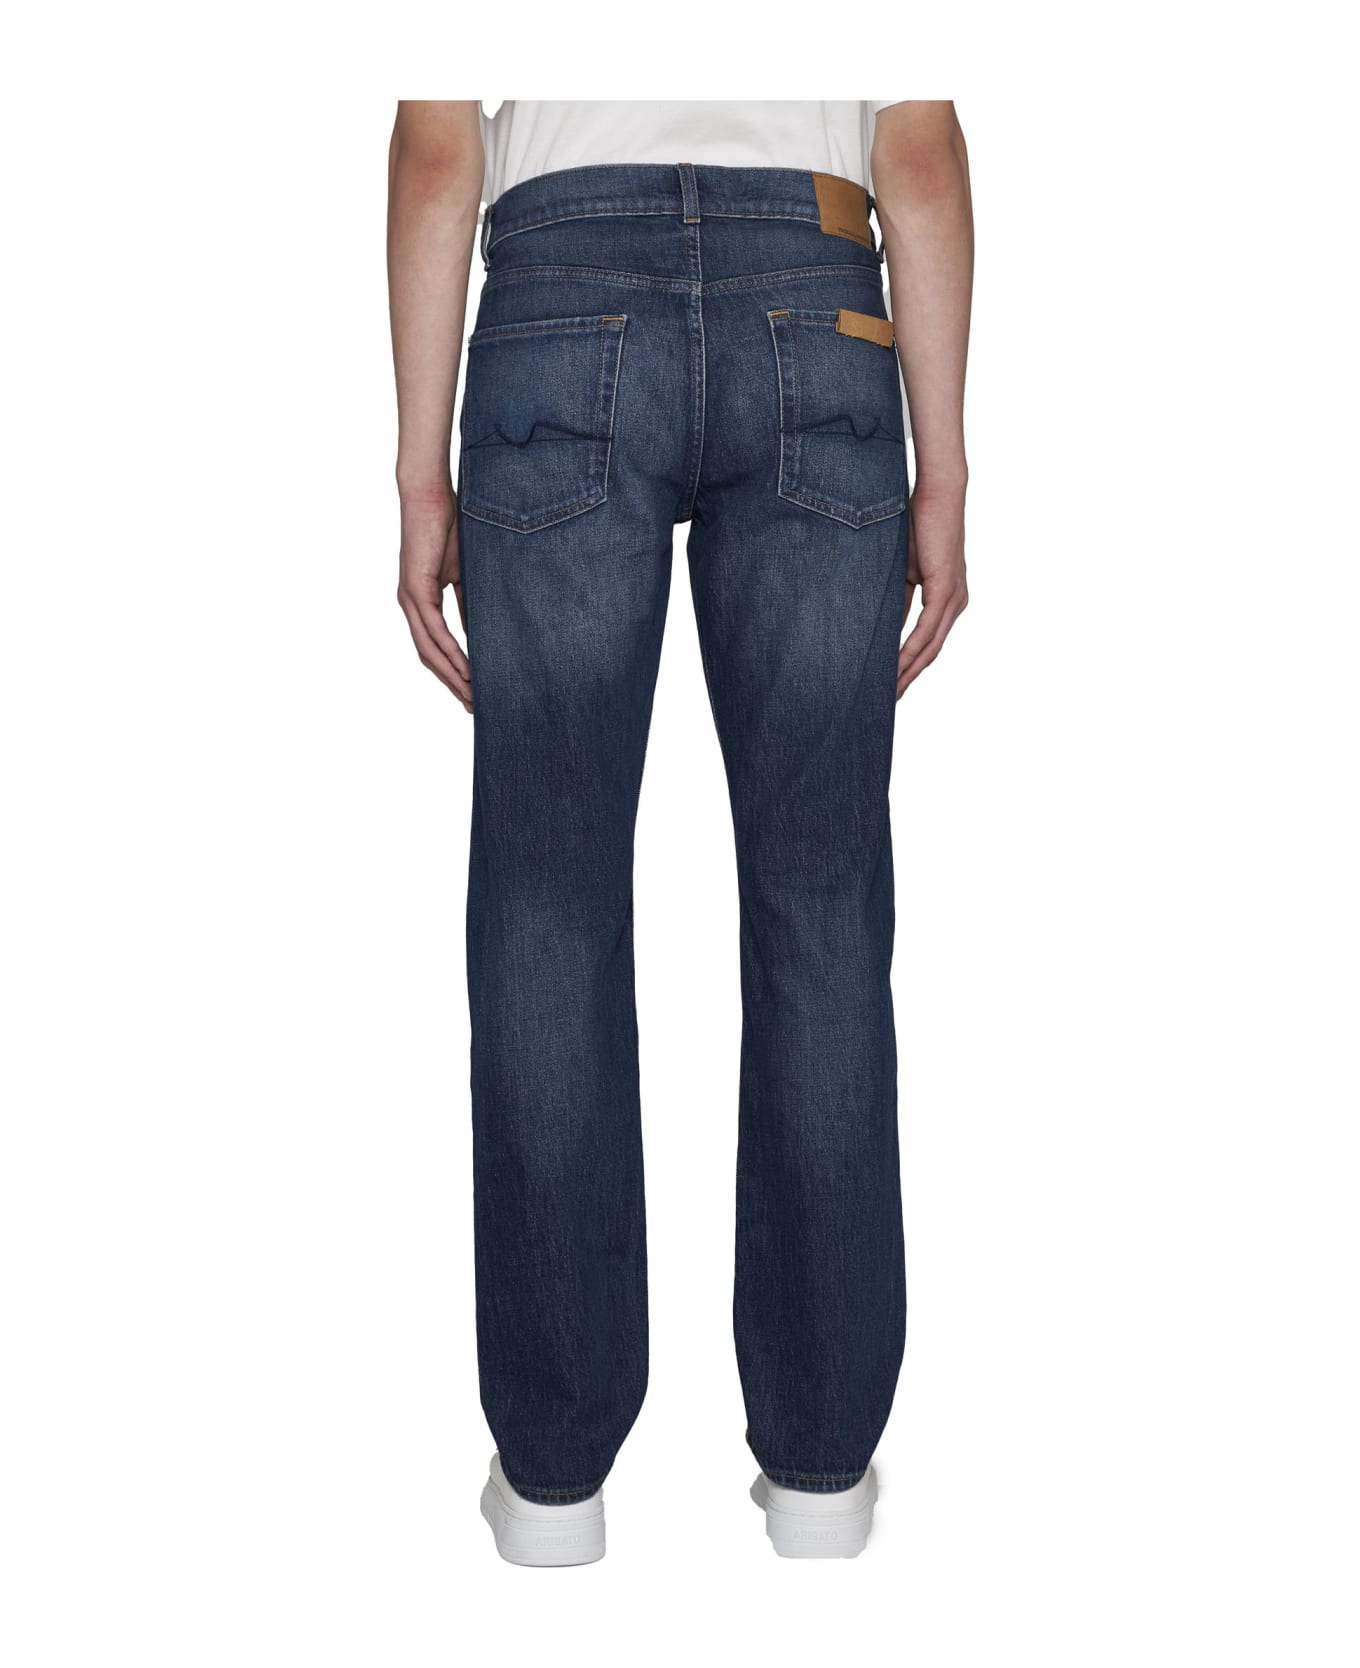 7 For All Mankind Jeans - Dark blue デニム